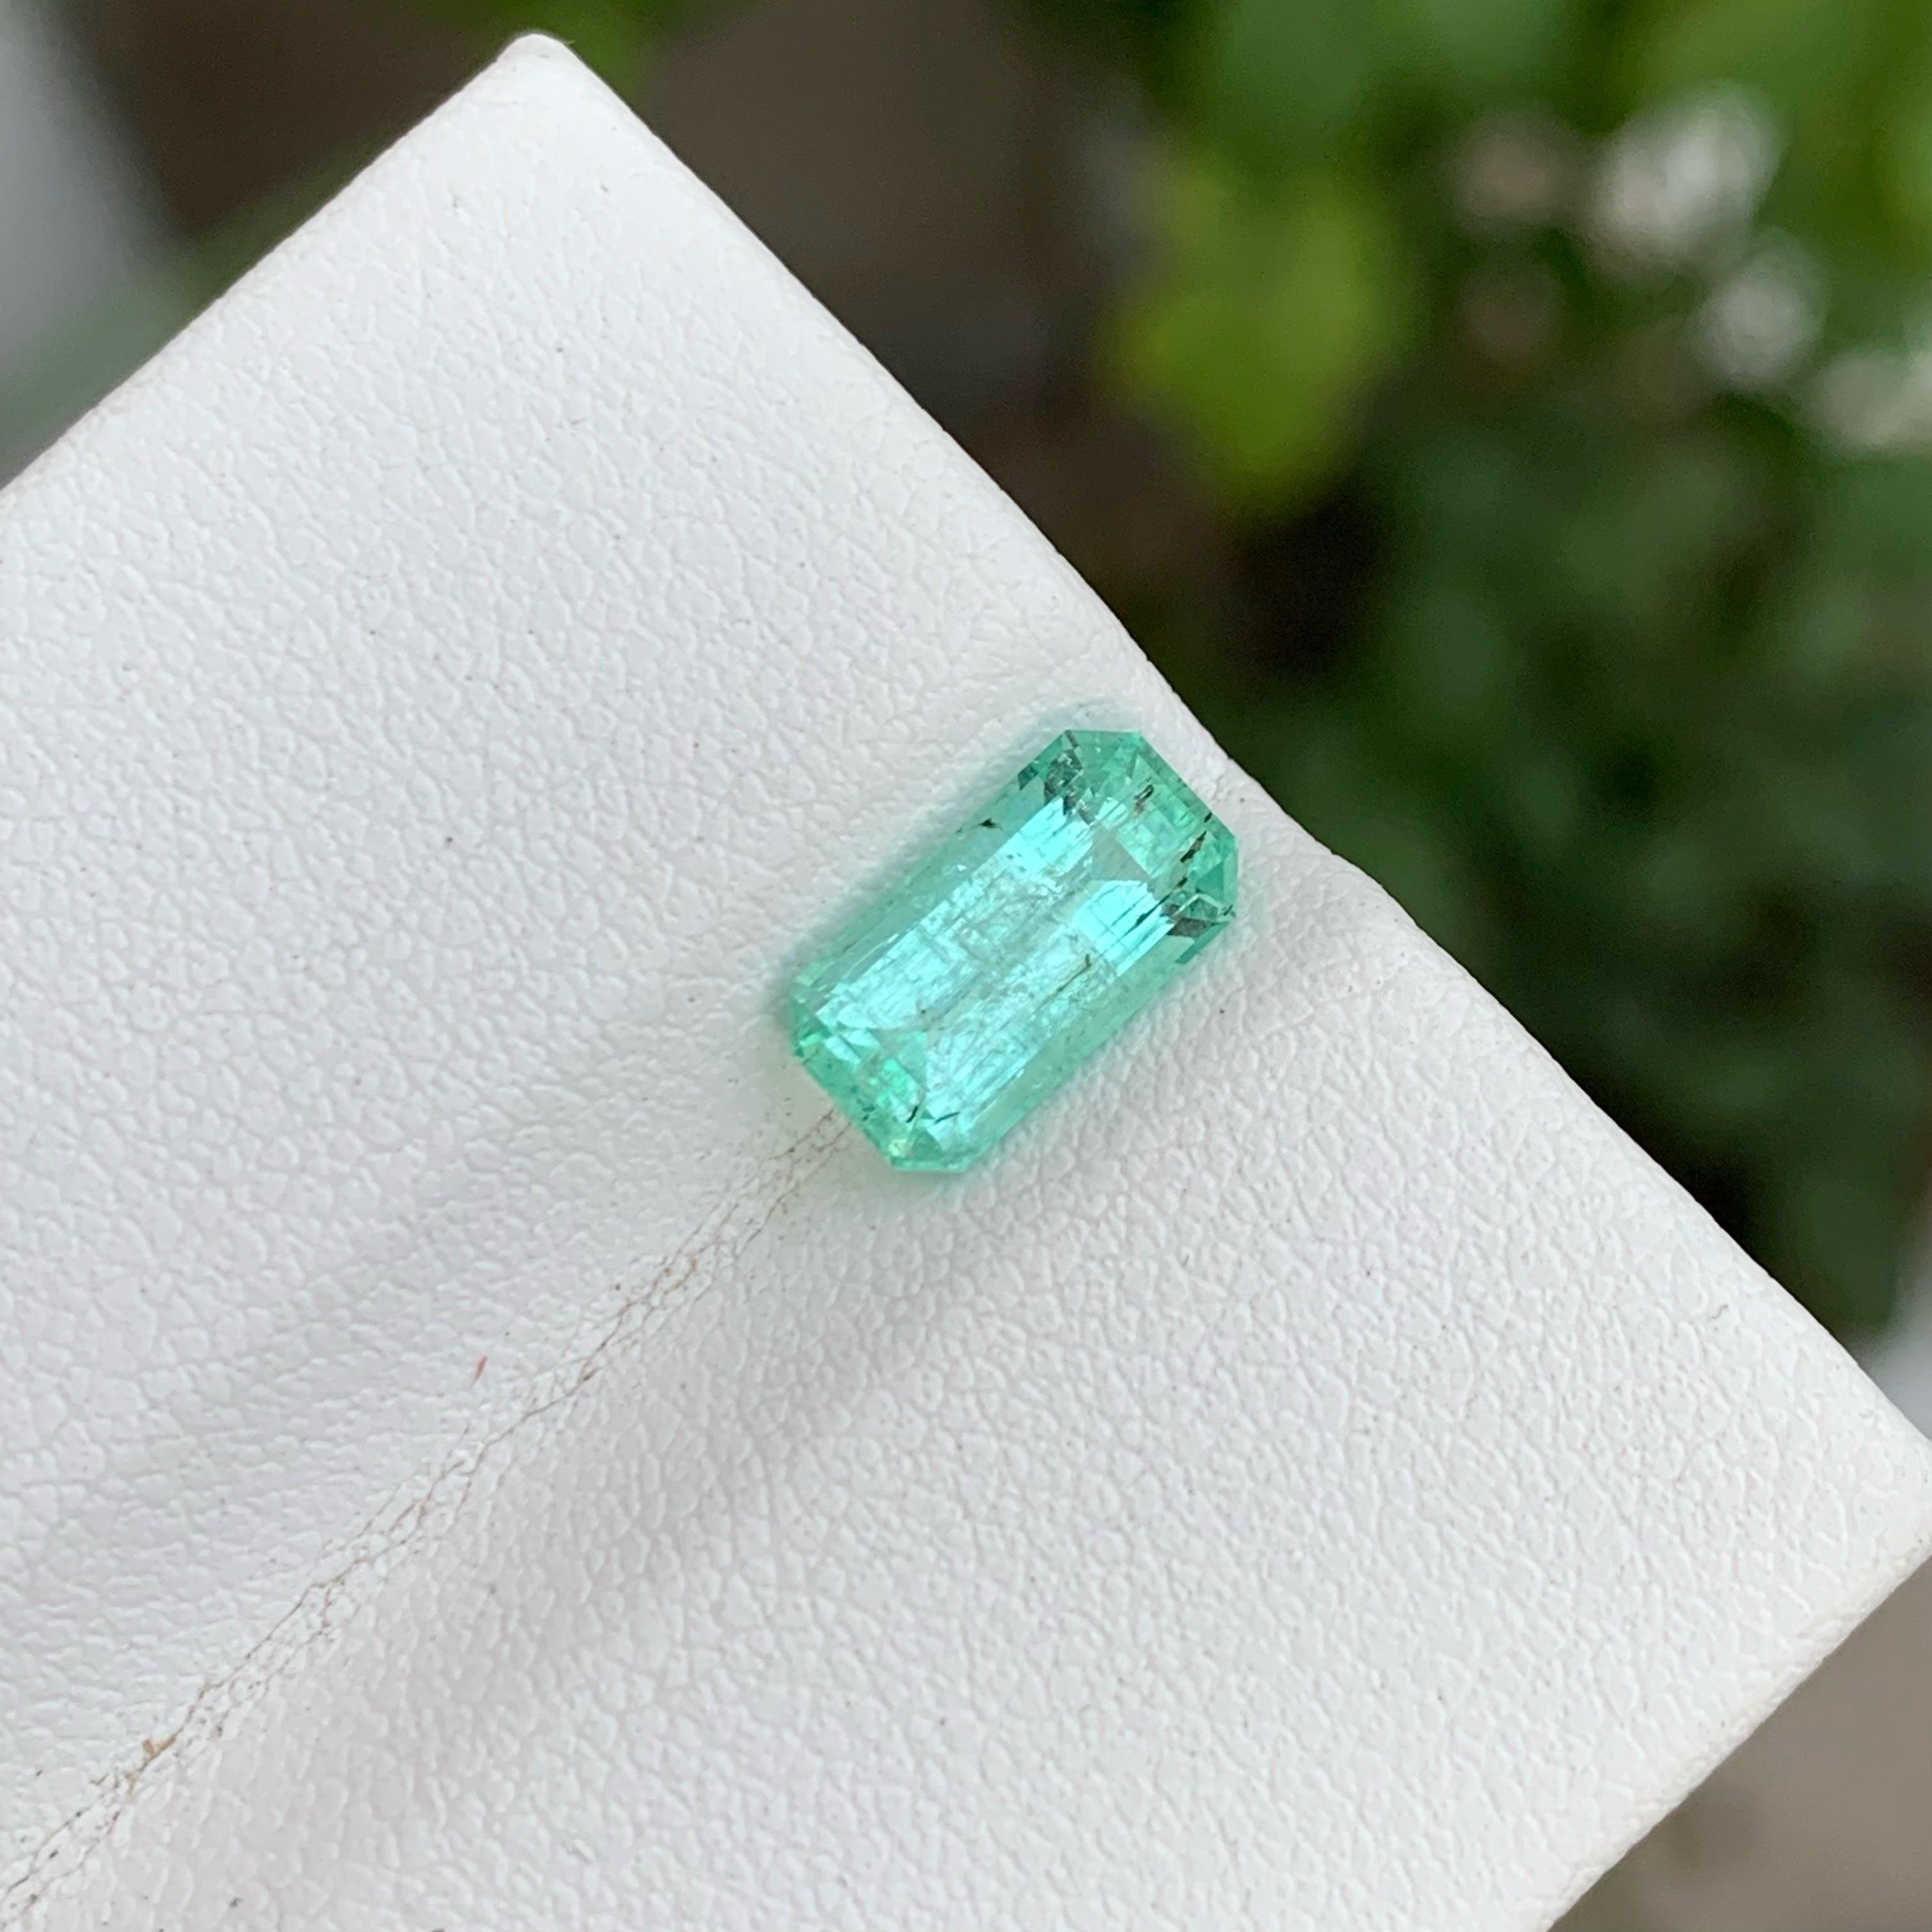 Stunning Natural Emerald Stone, Available for sale at wholesale price natural high quality 1.50 carats SI Clarity from Loose Emerald Punjsher, Afghanistan.

Product Information: 
GEMSTONE NAME: Stunning Natural Emerald Stone
WEIGHT:	1.50